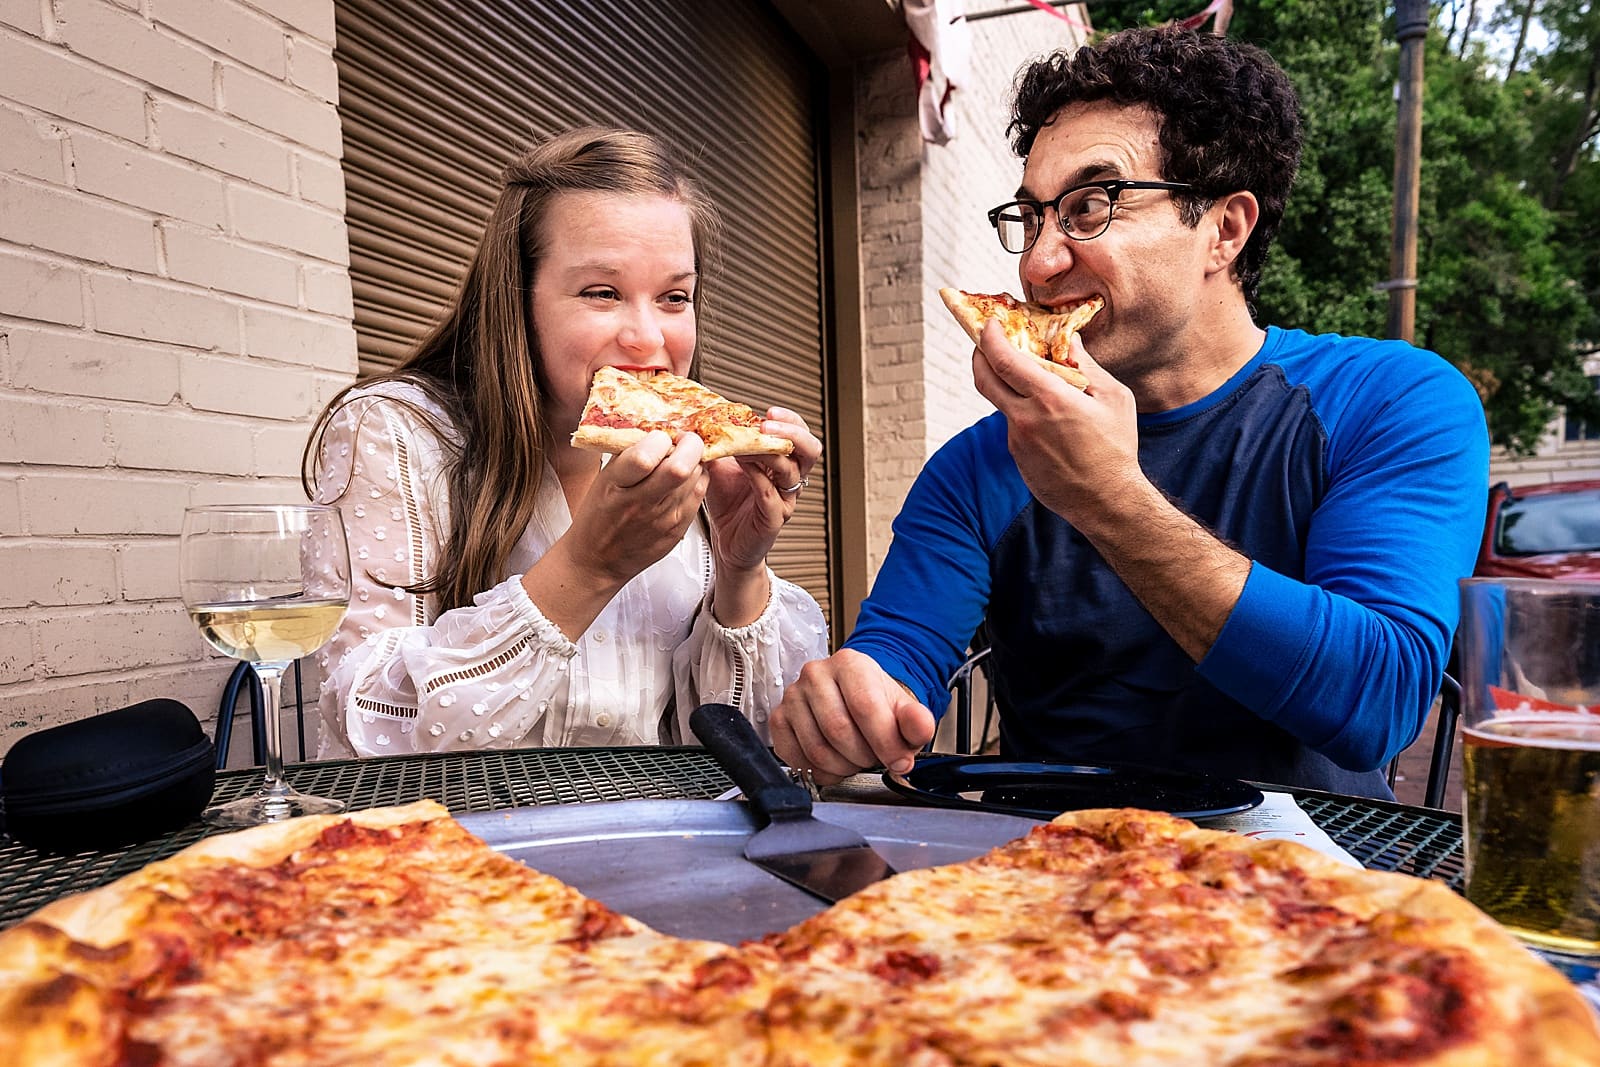 Have fun with your engagement photos - eat pizza and toast one another. 